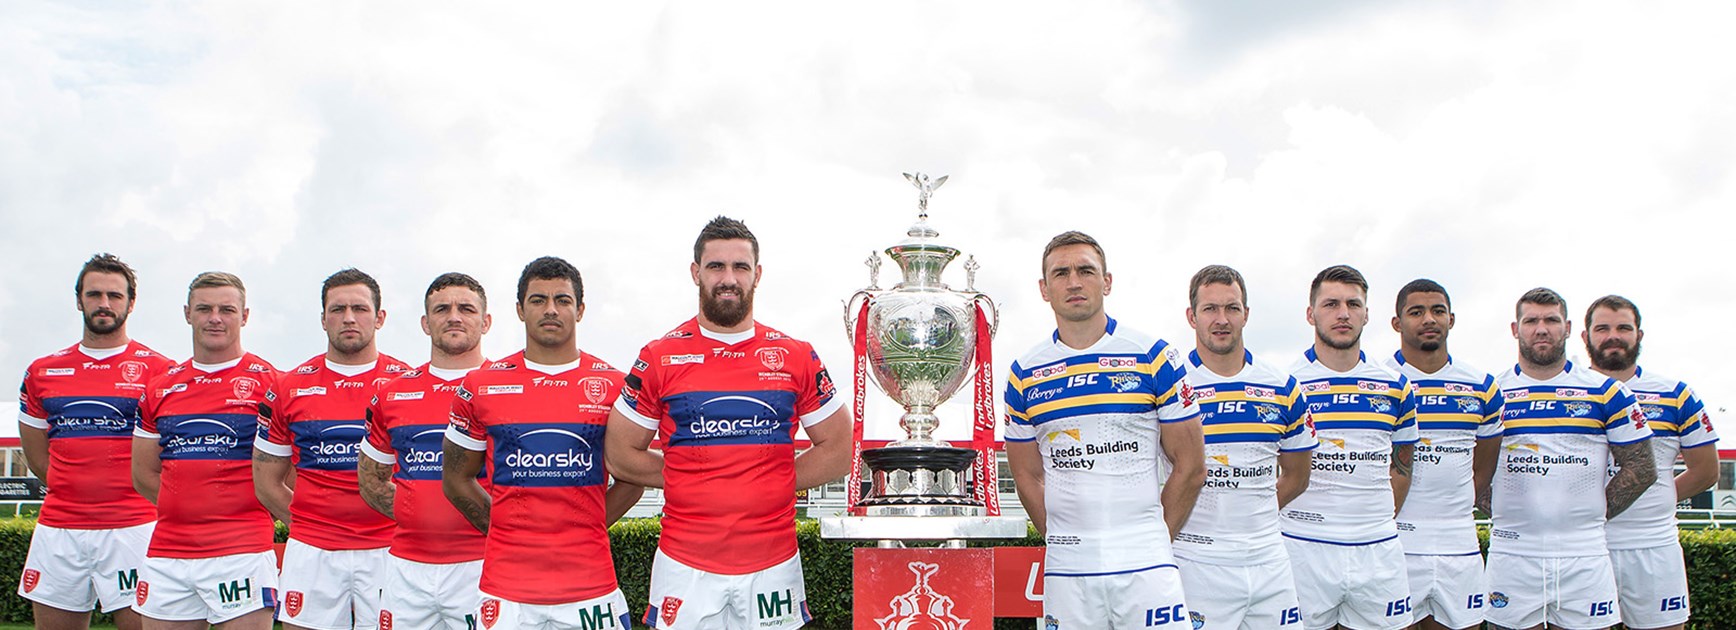 Hull KR and Leeds Rhinos meet in the Challenge Cup Final on Saturday night.